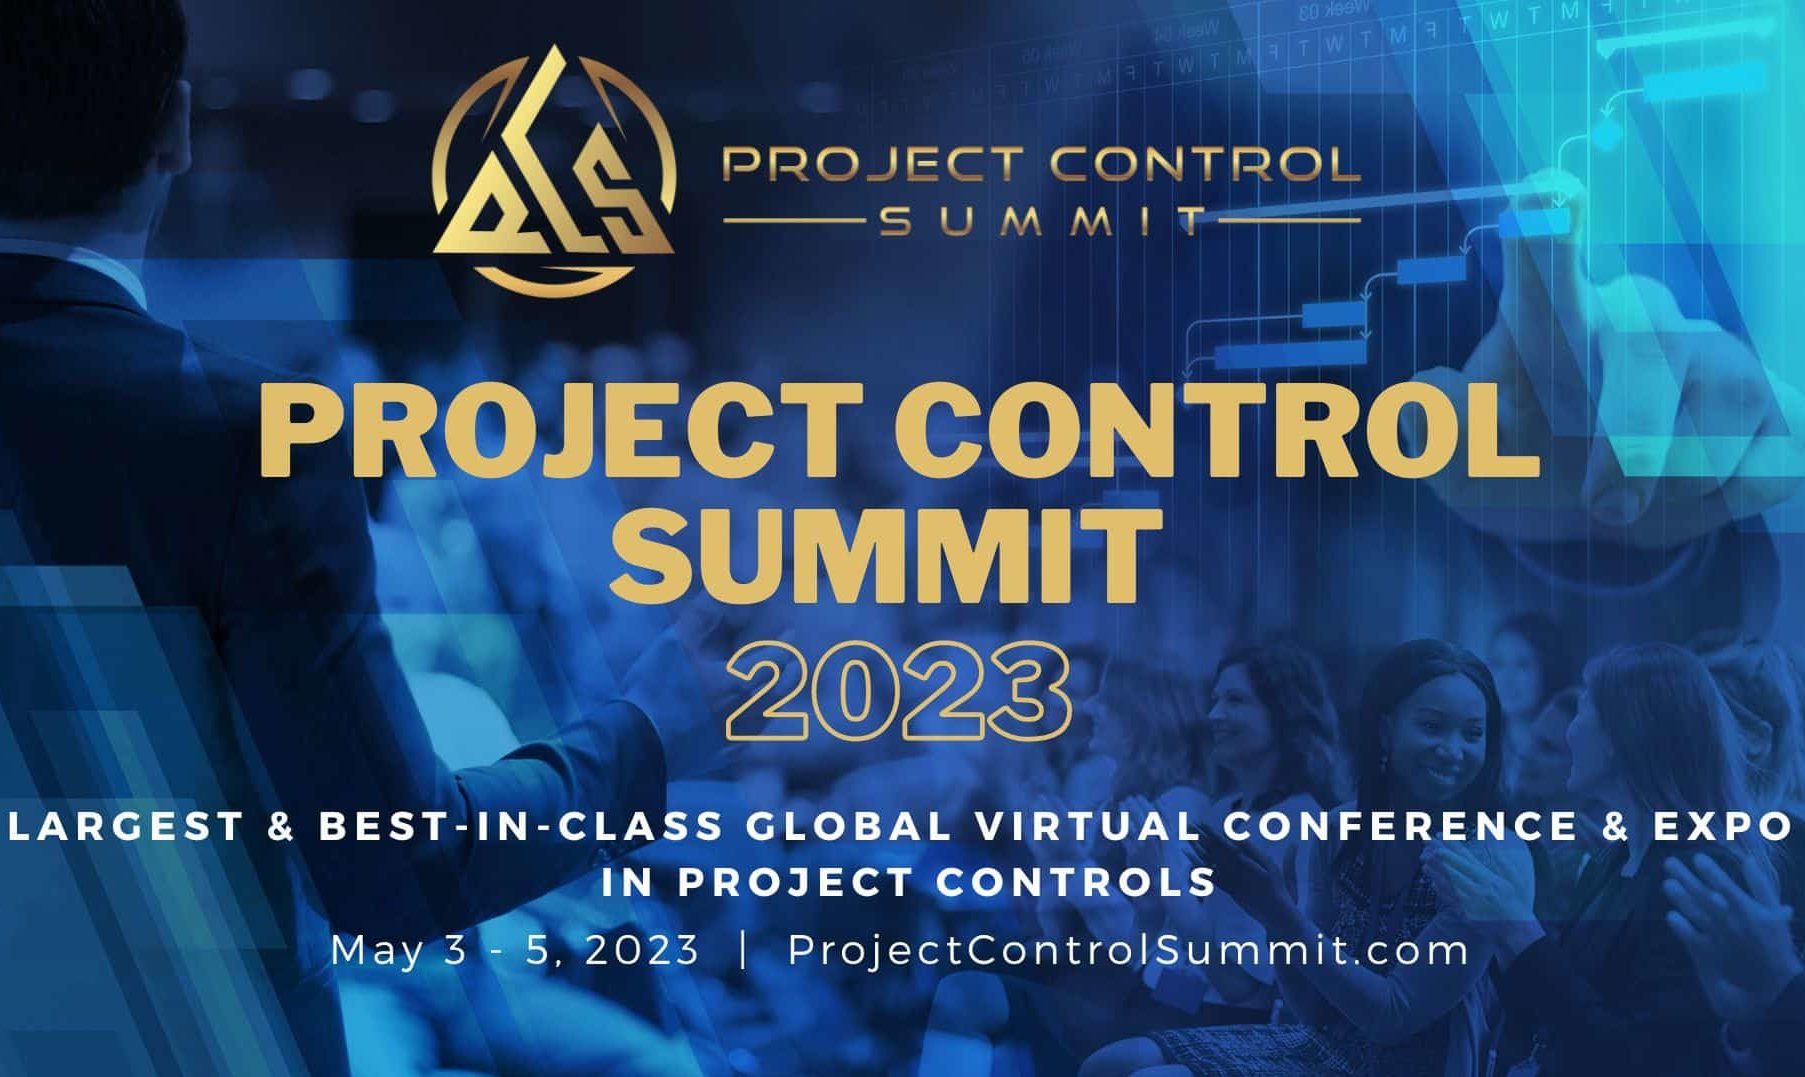 Project Control Academy Events: Live and On-demand Masterclasses